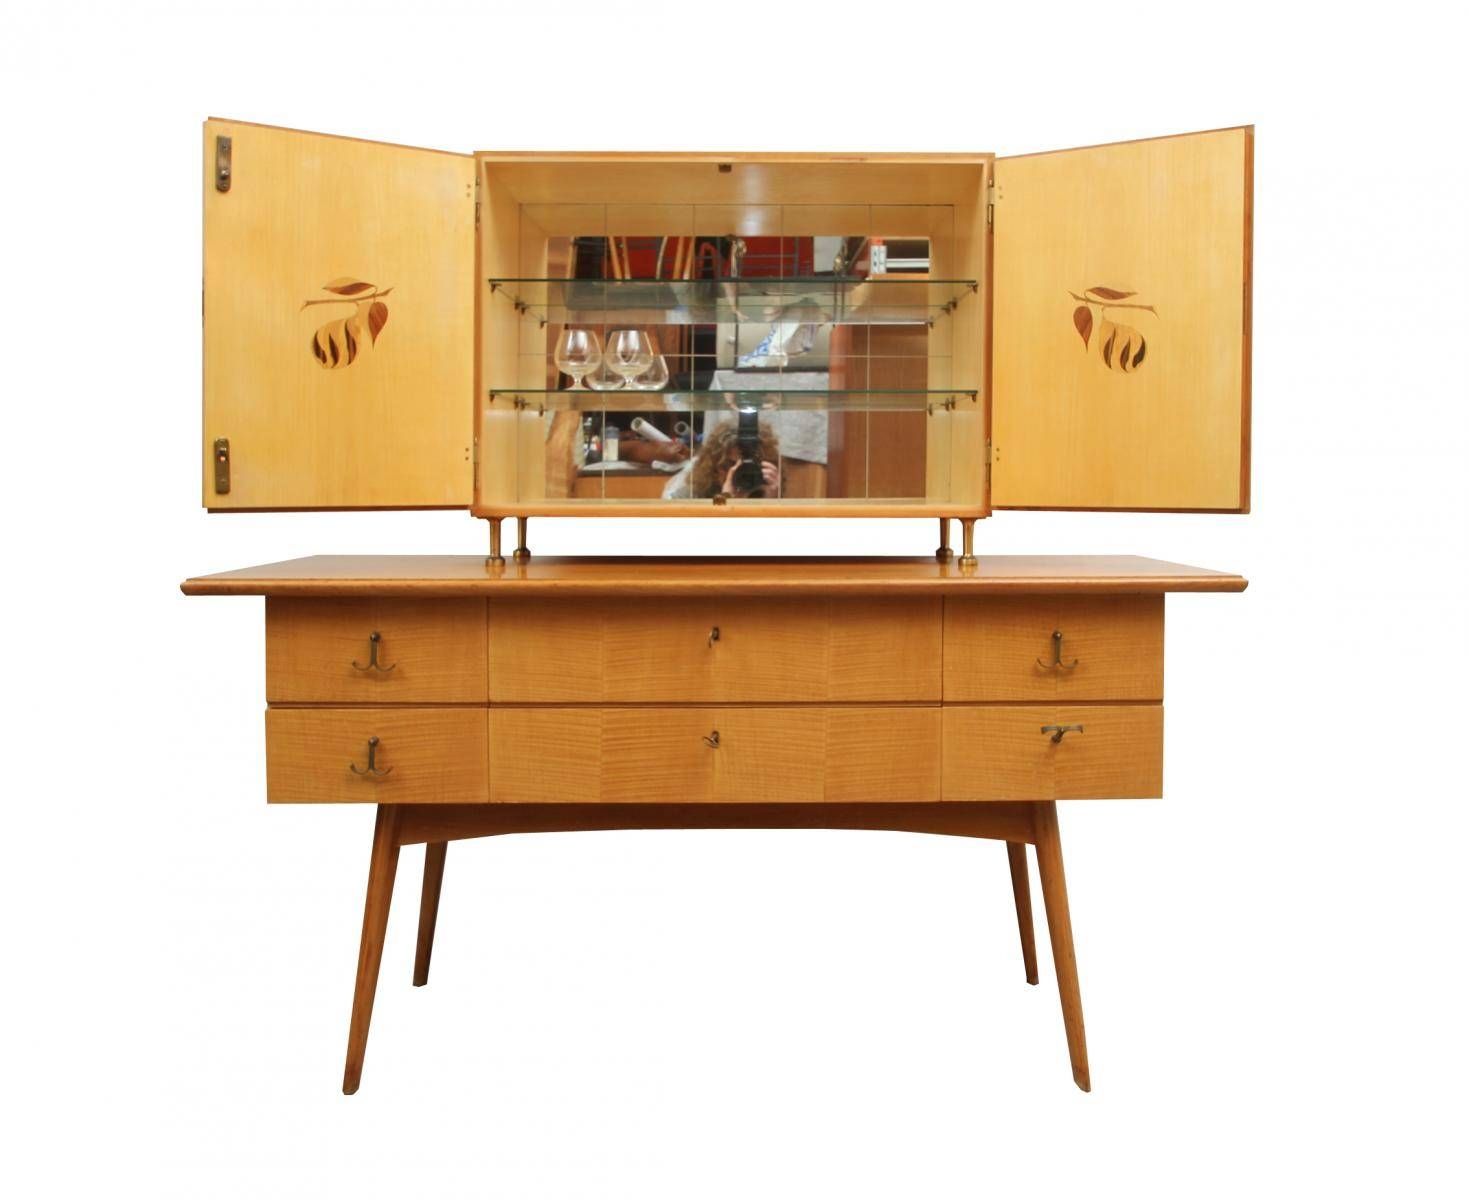 Cherry Wood Sideboard And Bar Cabinet, 1950s For Sale At Pamono With Regard To Sideboard Bar Cabinet (View 4 of 15)